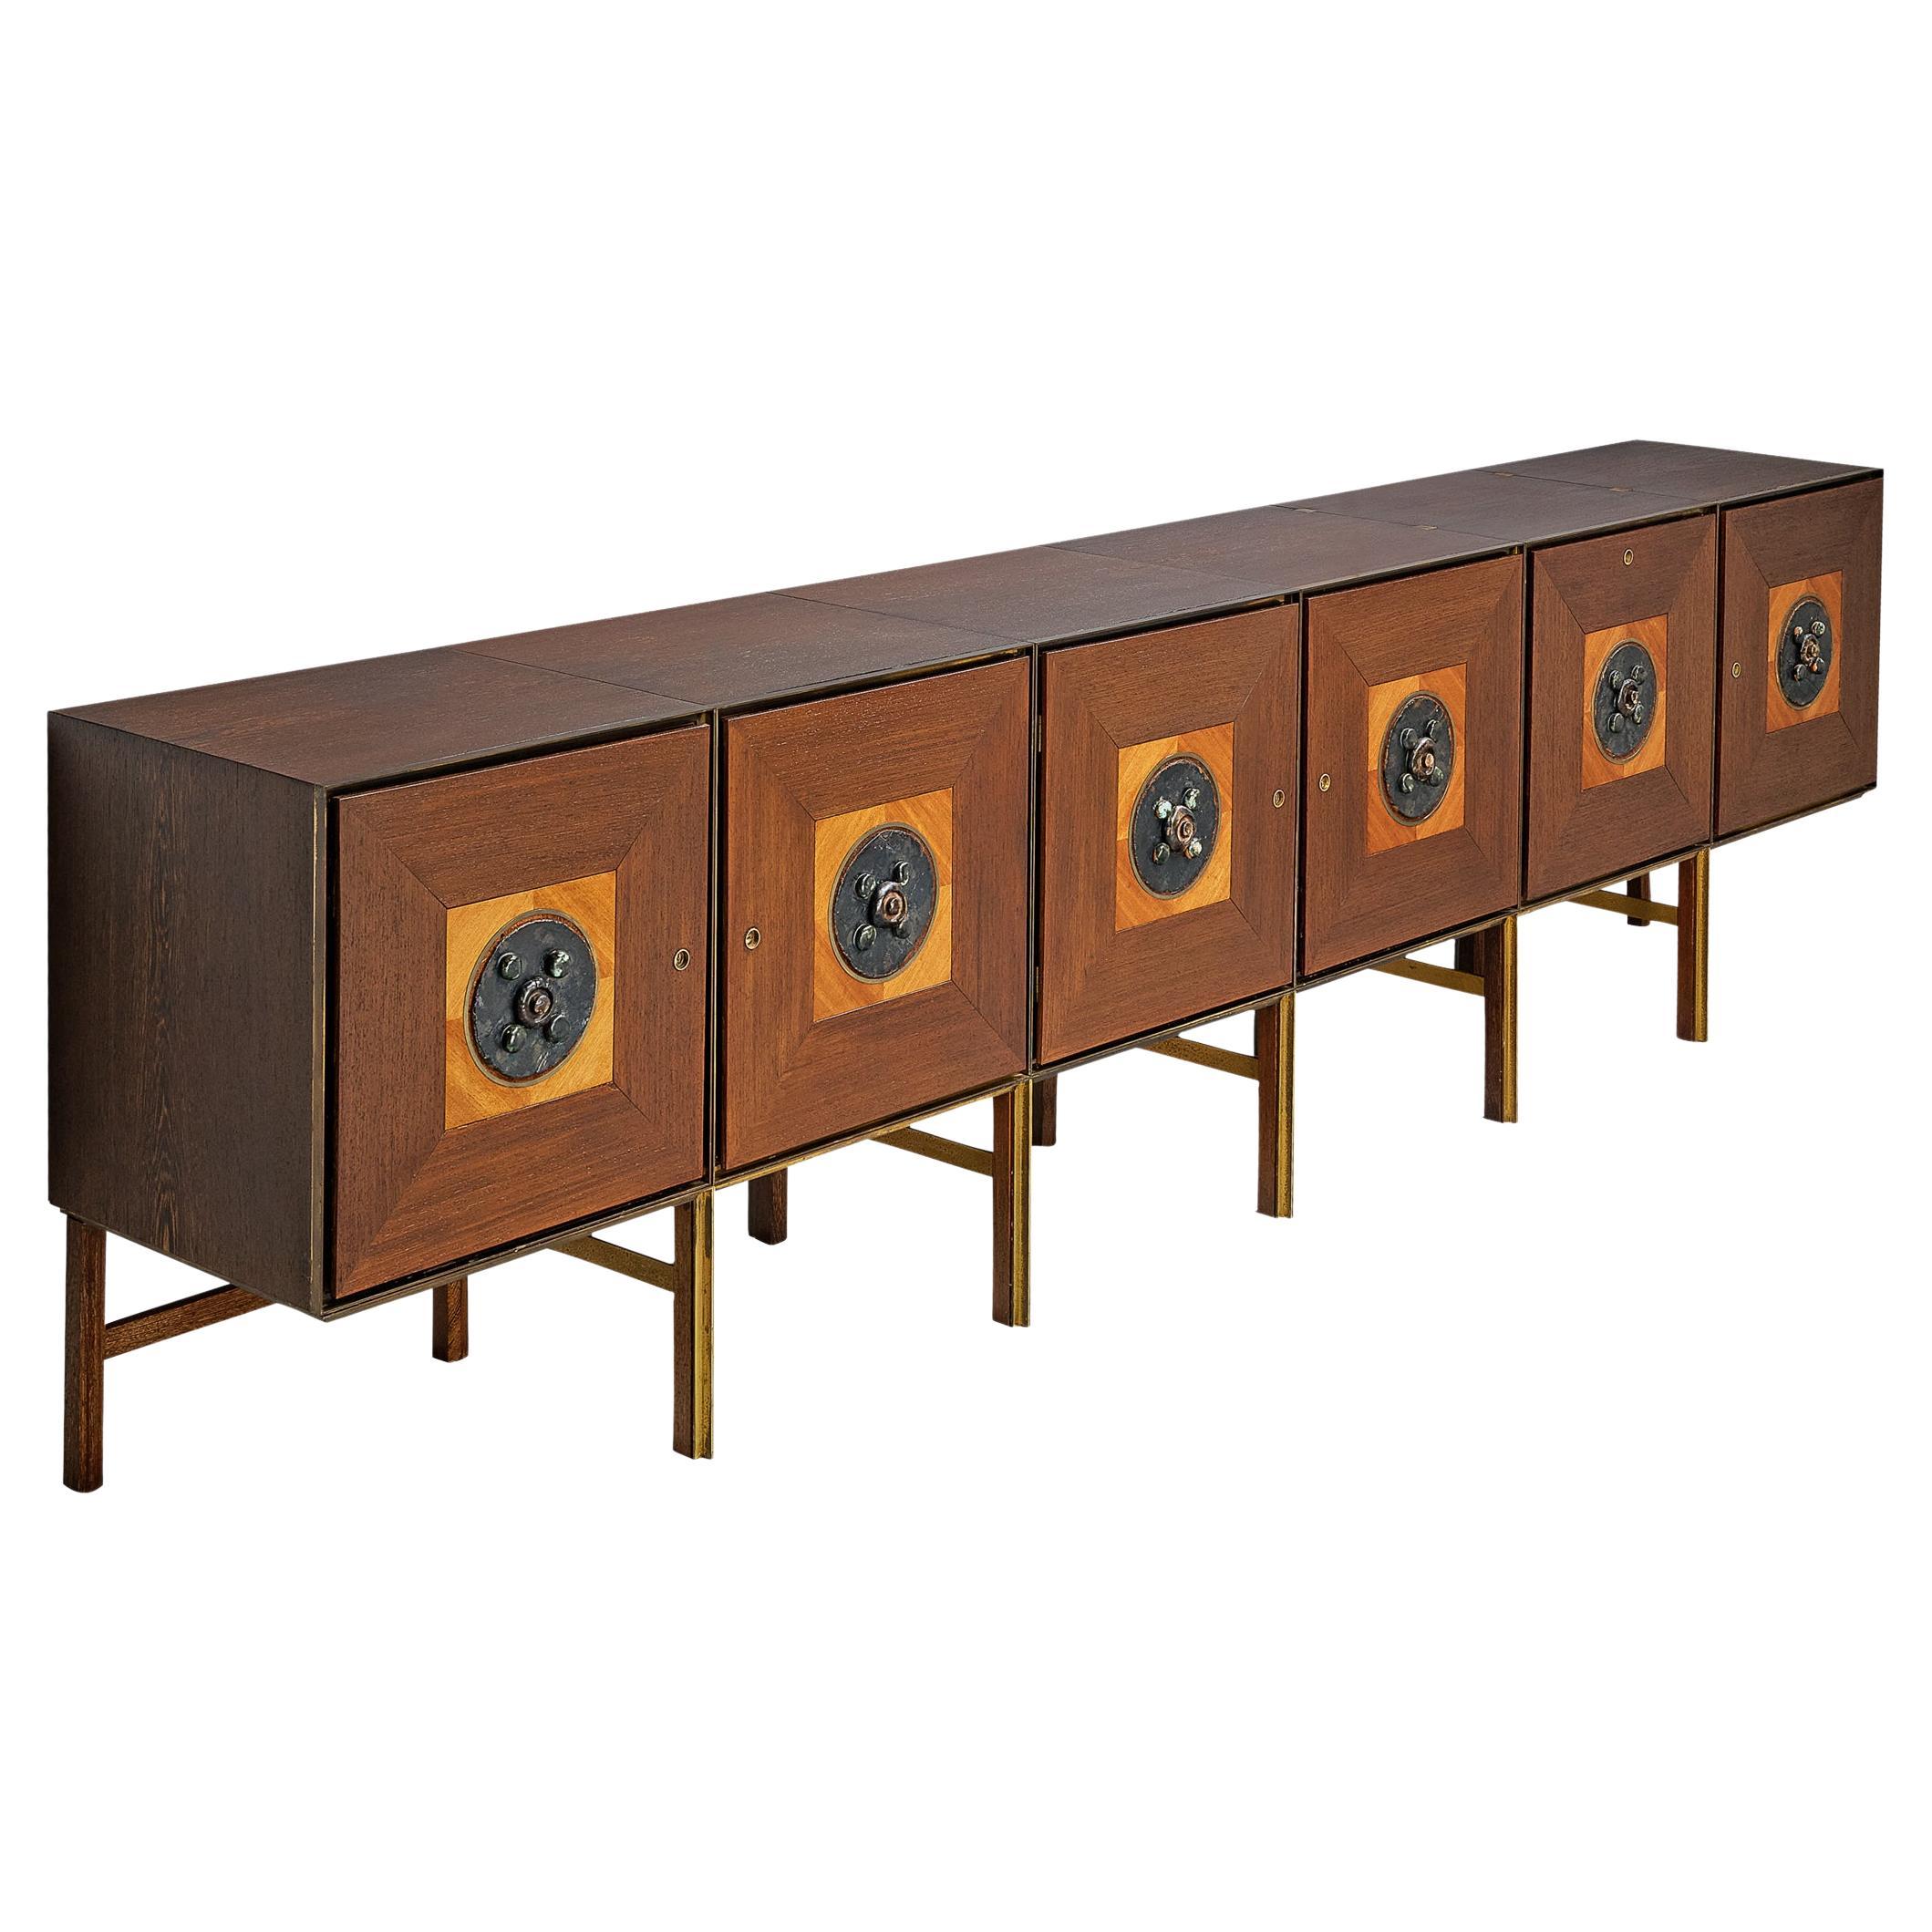 Exceptional Flemish Sideboard in Wenge and Ceramics For Sale at 1stDibs